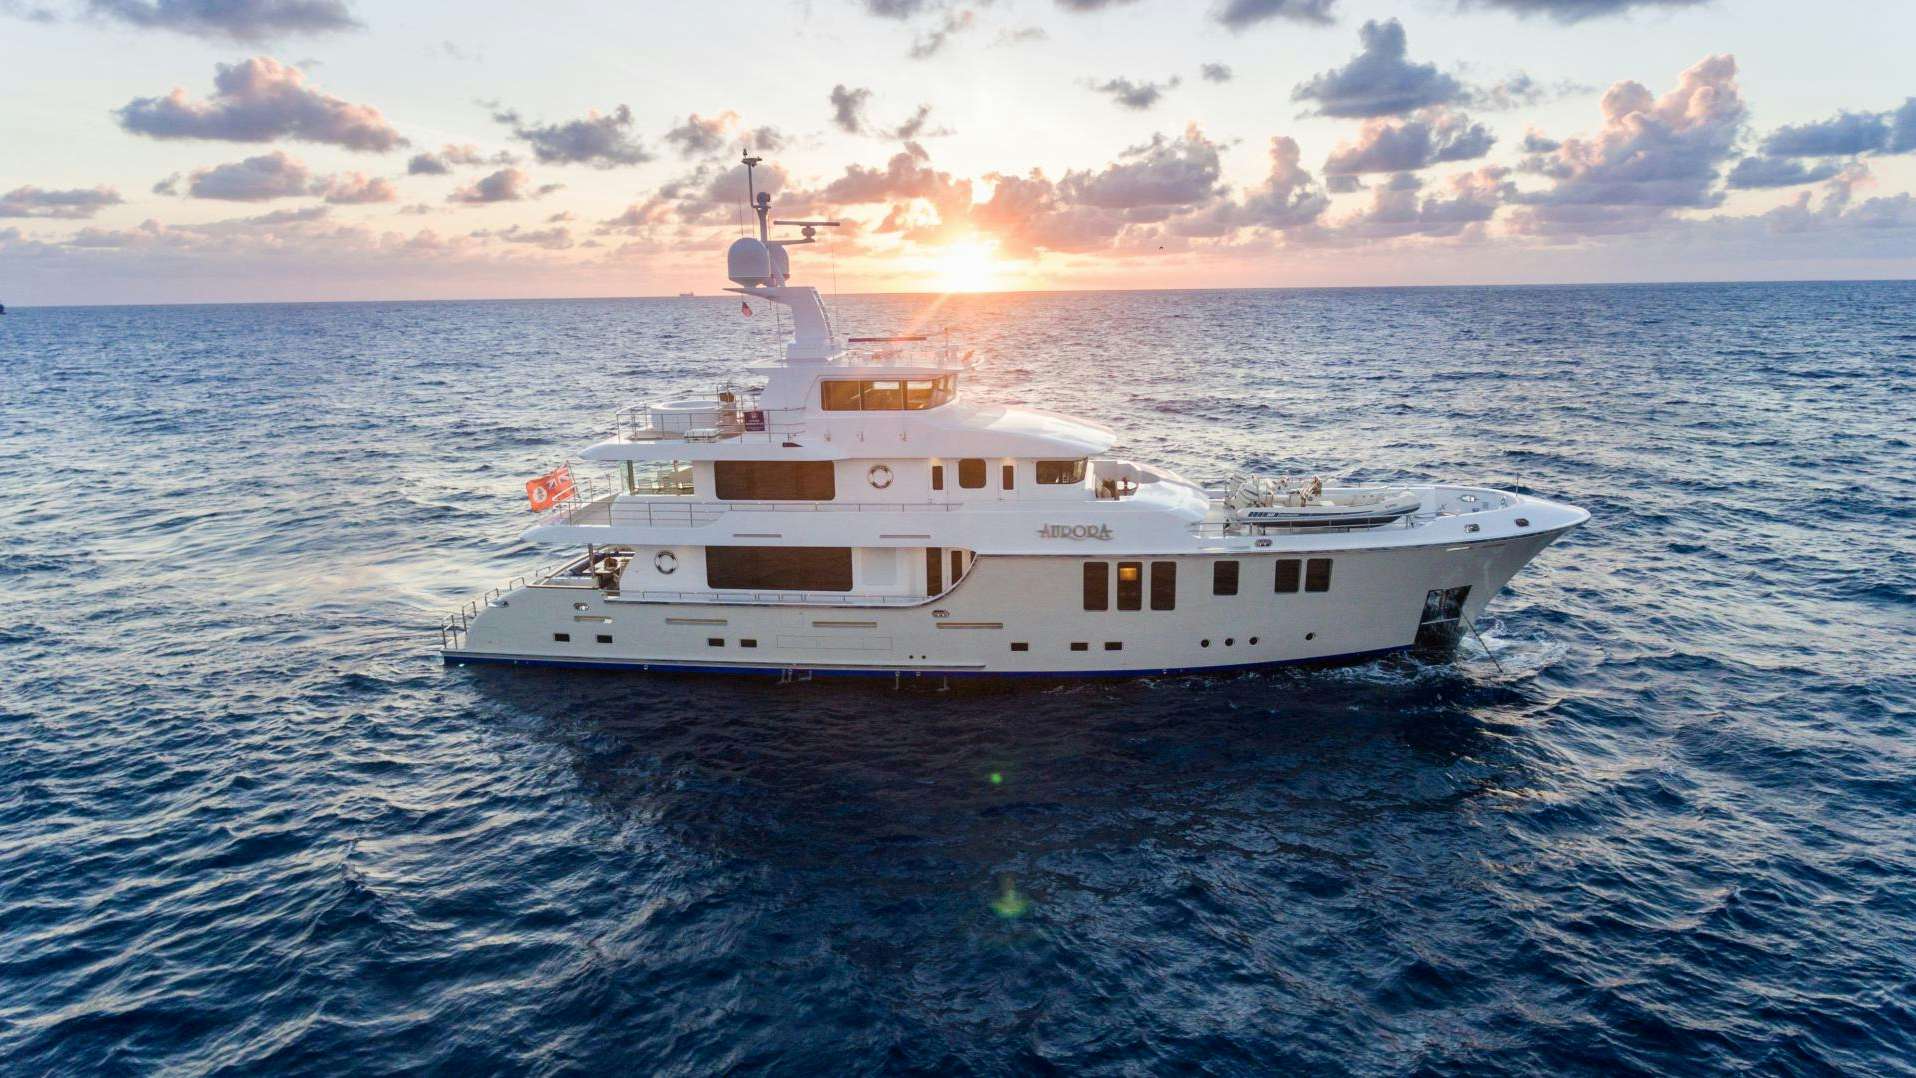 Watch Video for MY AURORA Yacht for Sale